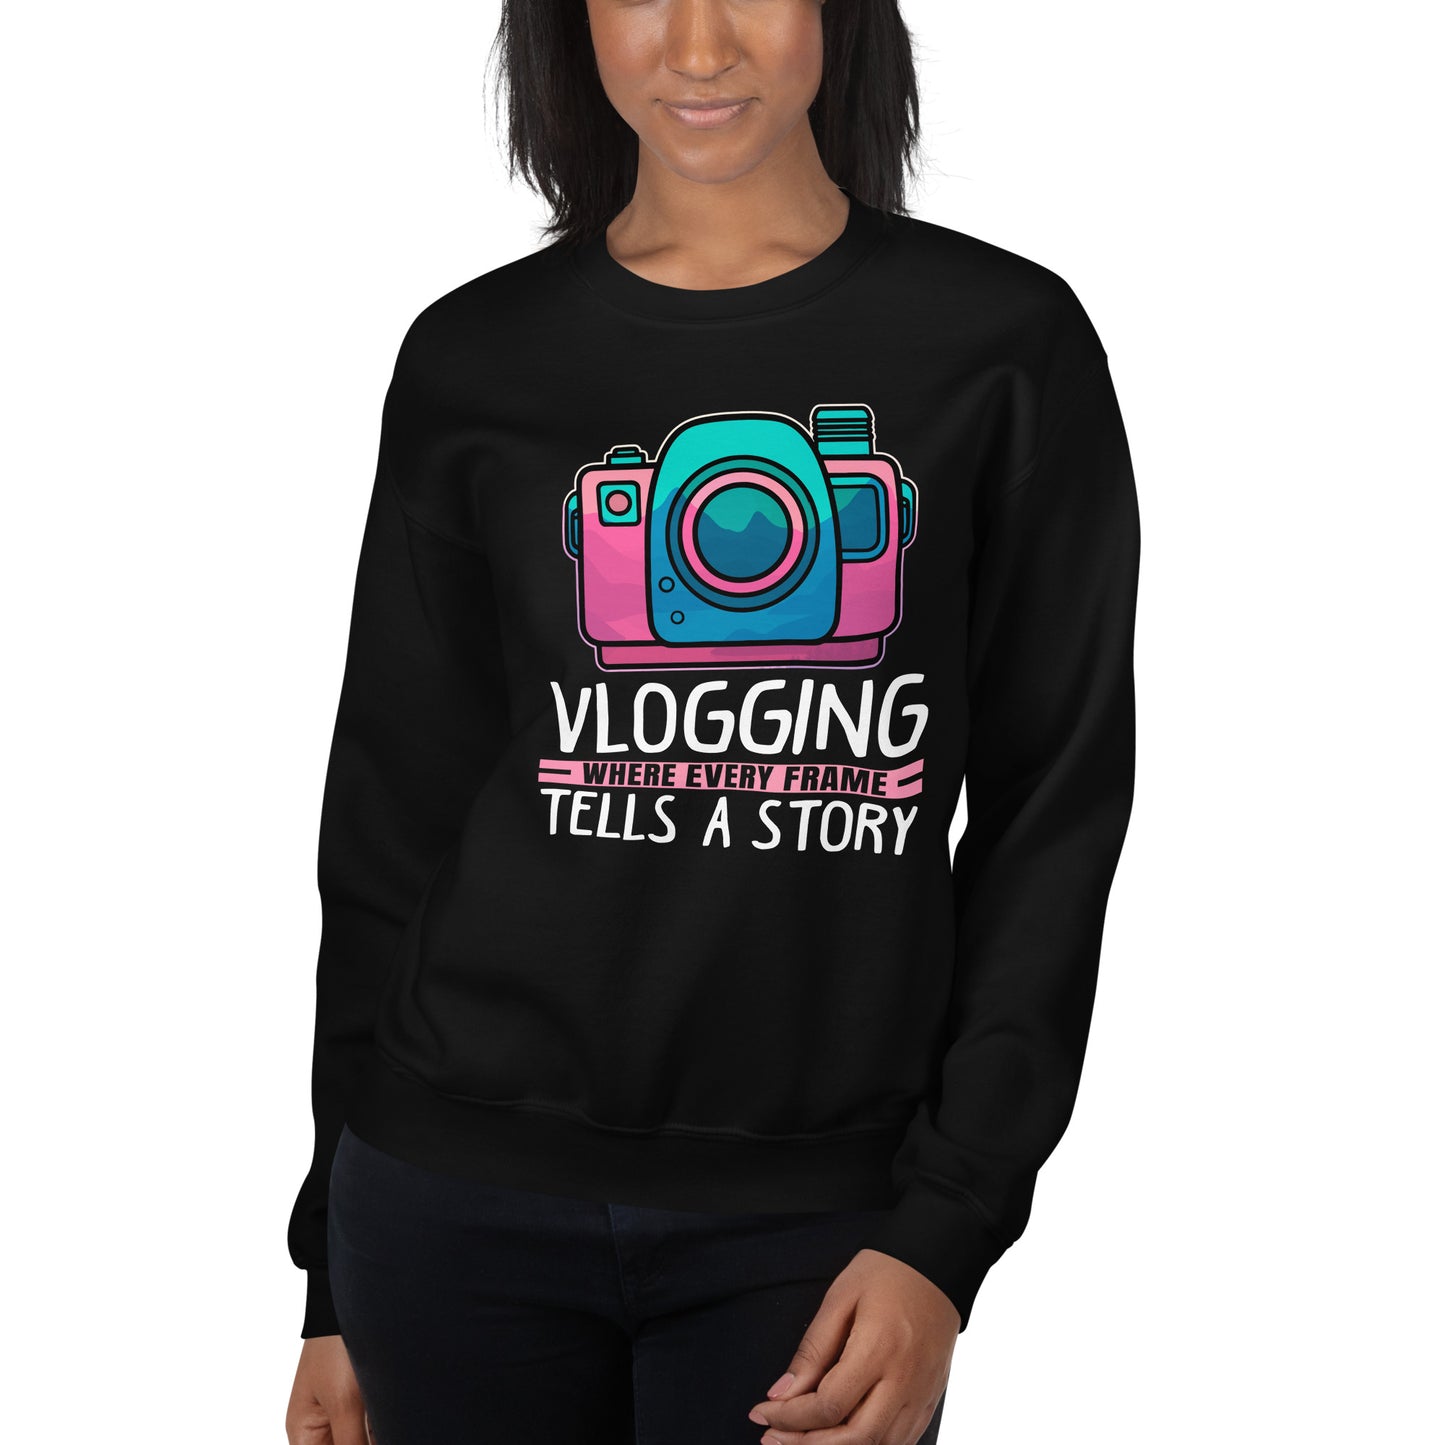 Vlogging where every Frame tells a Story Pullover